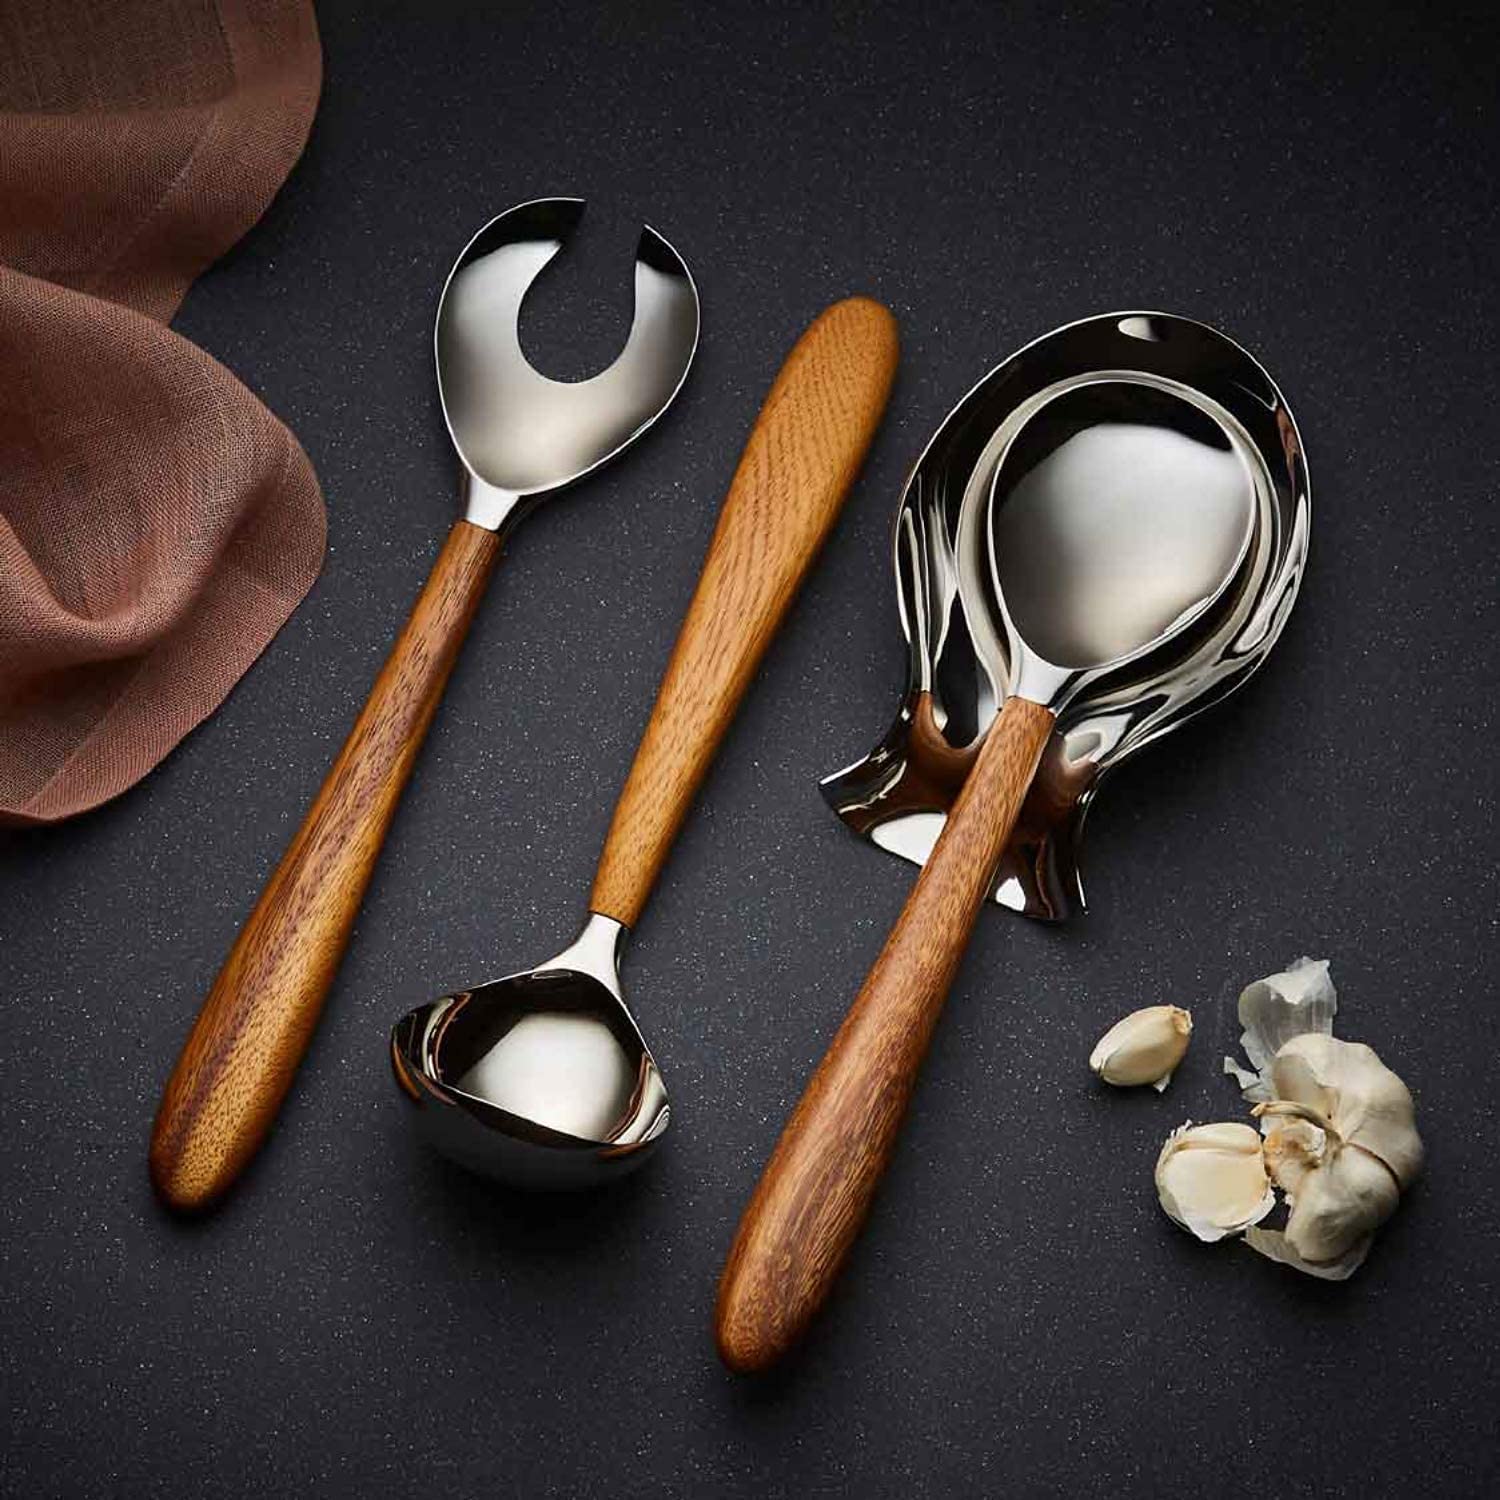 Nambe - Gourmet Collection - Curvo Serving Fork - Measures at 13" - Made with Acacia Wood and Stainless Steel - Designed by Steve Cozzolino